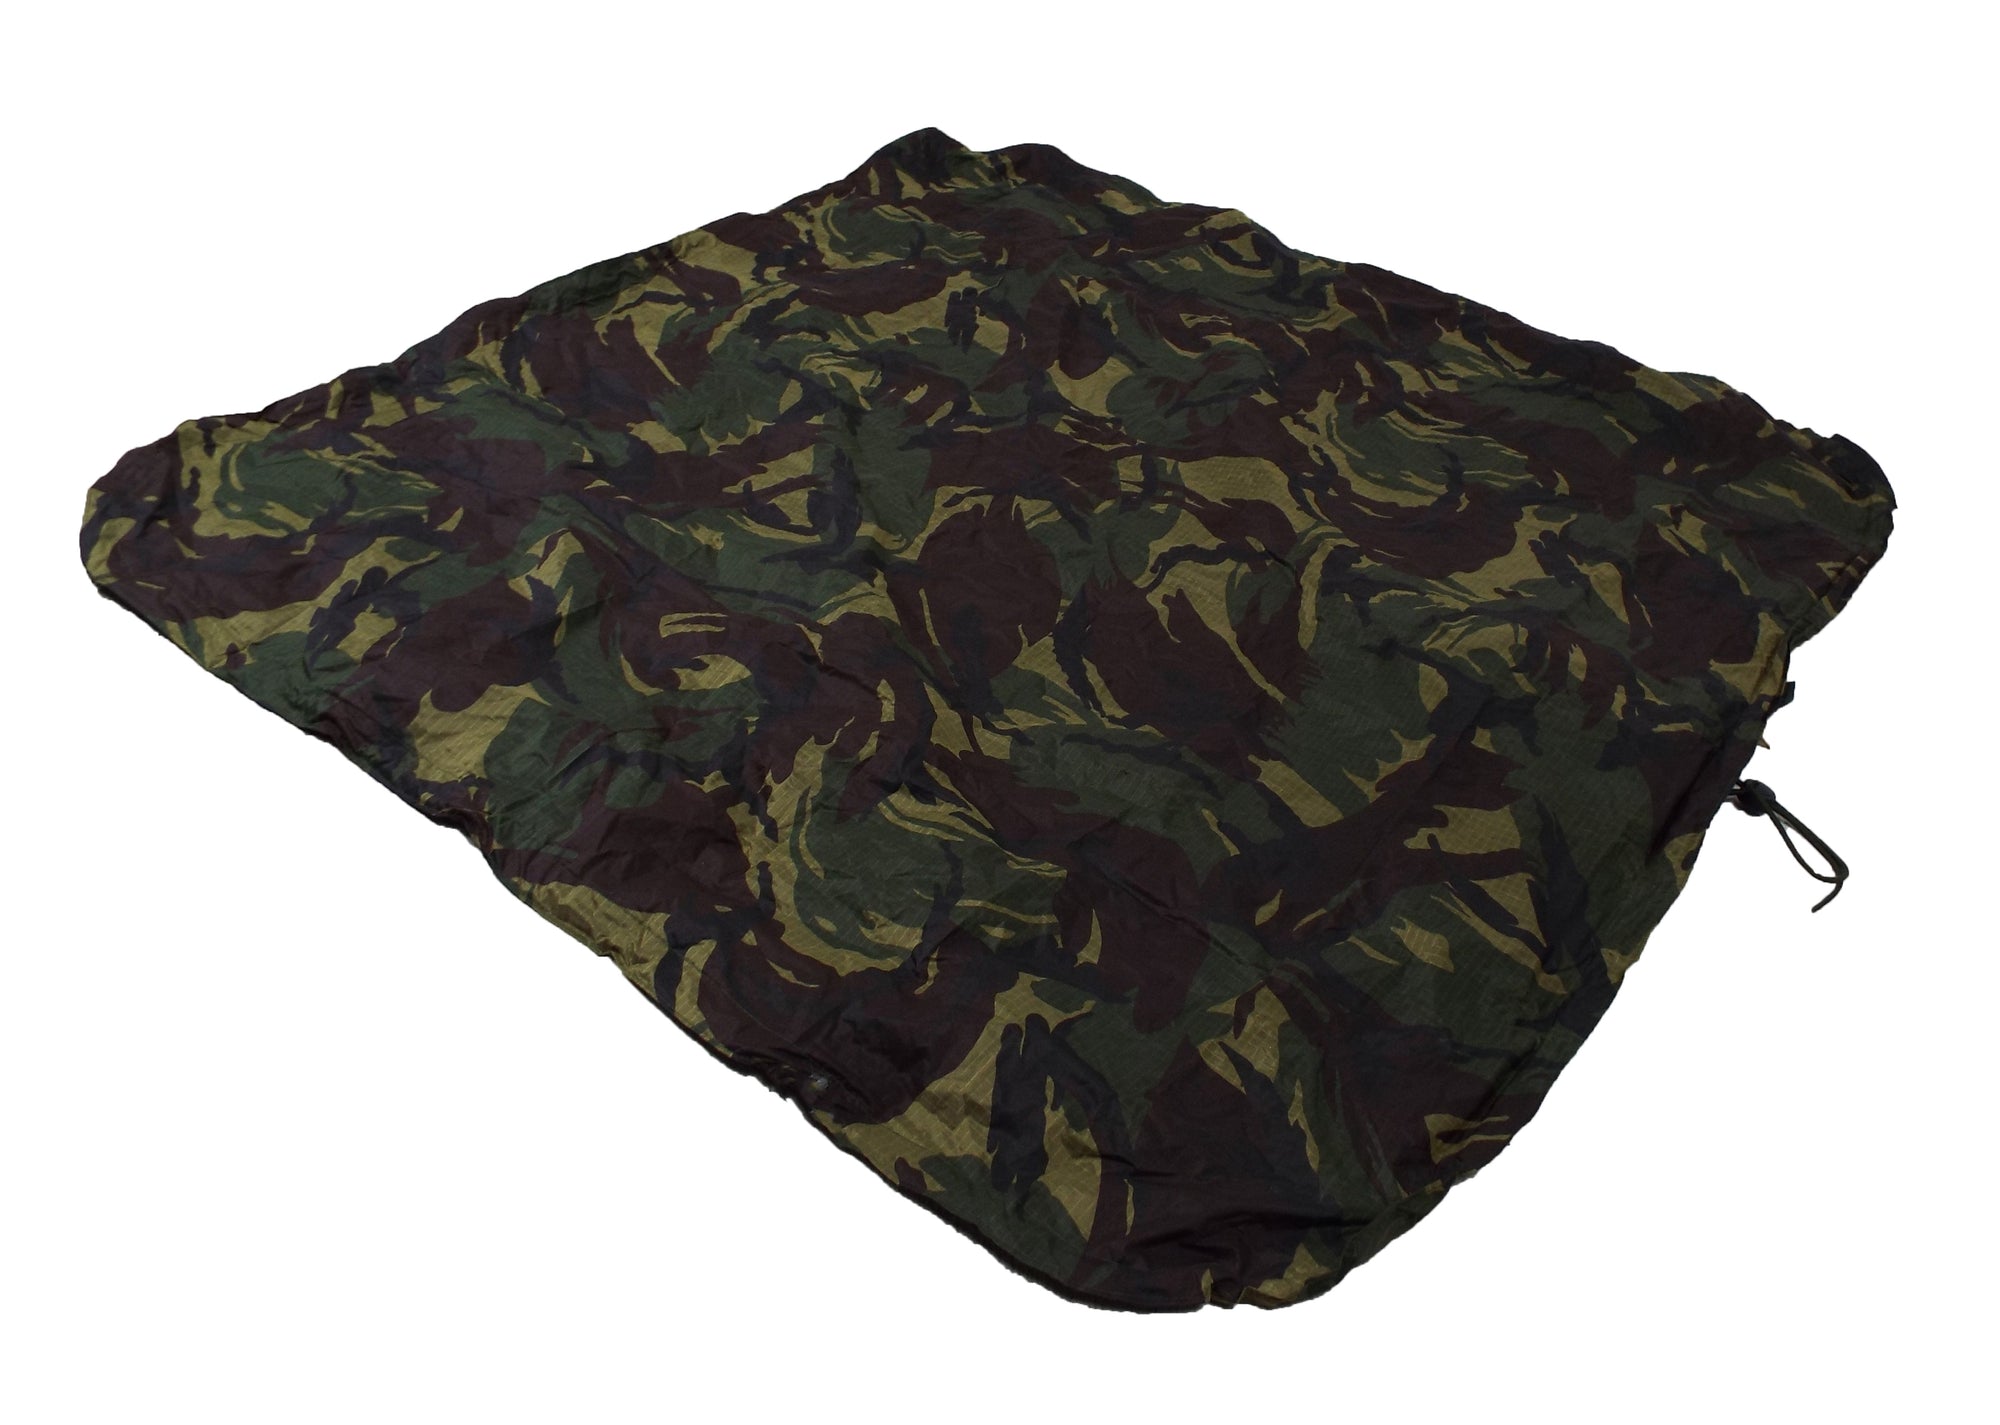 Dutch Army - DPM and Snow Bergen Cover - Utility Sheet - Grade 1